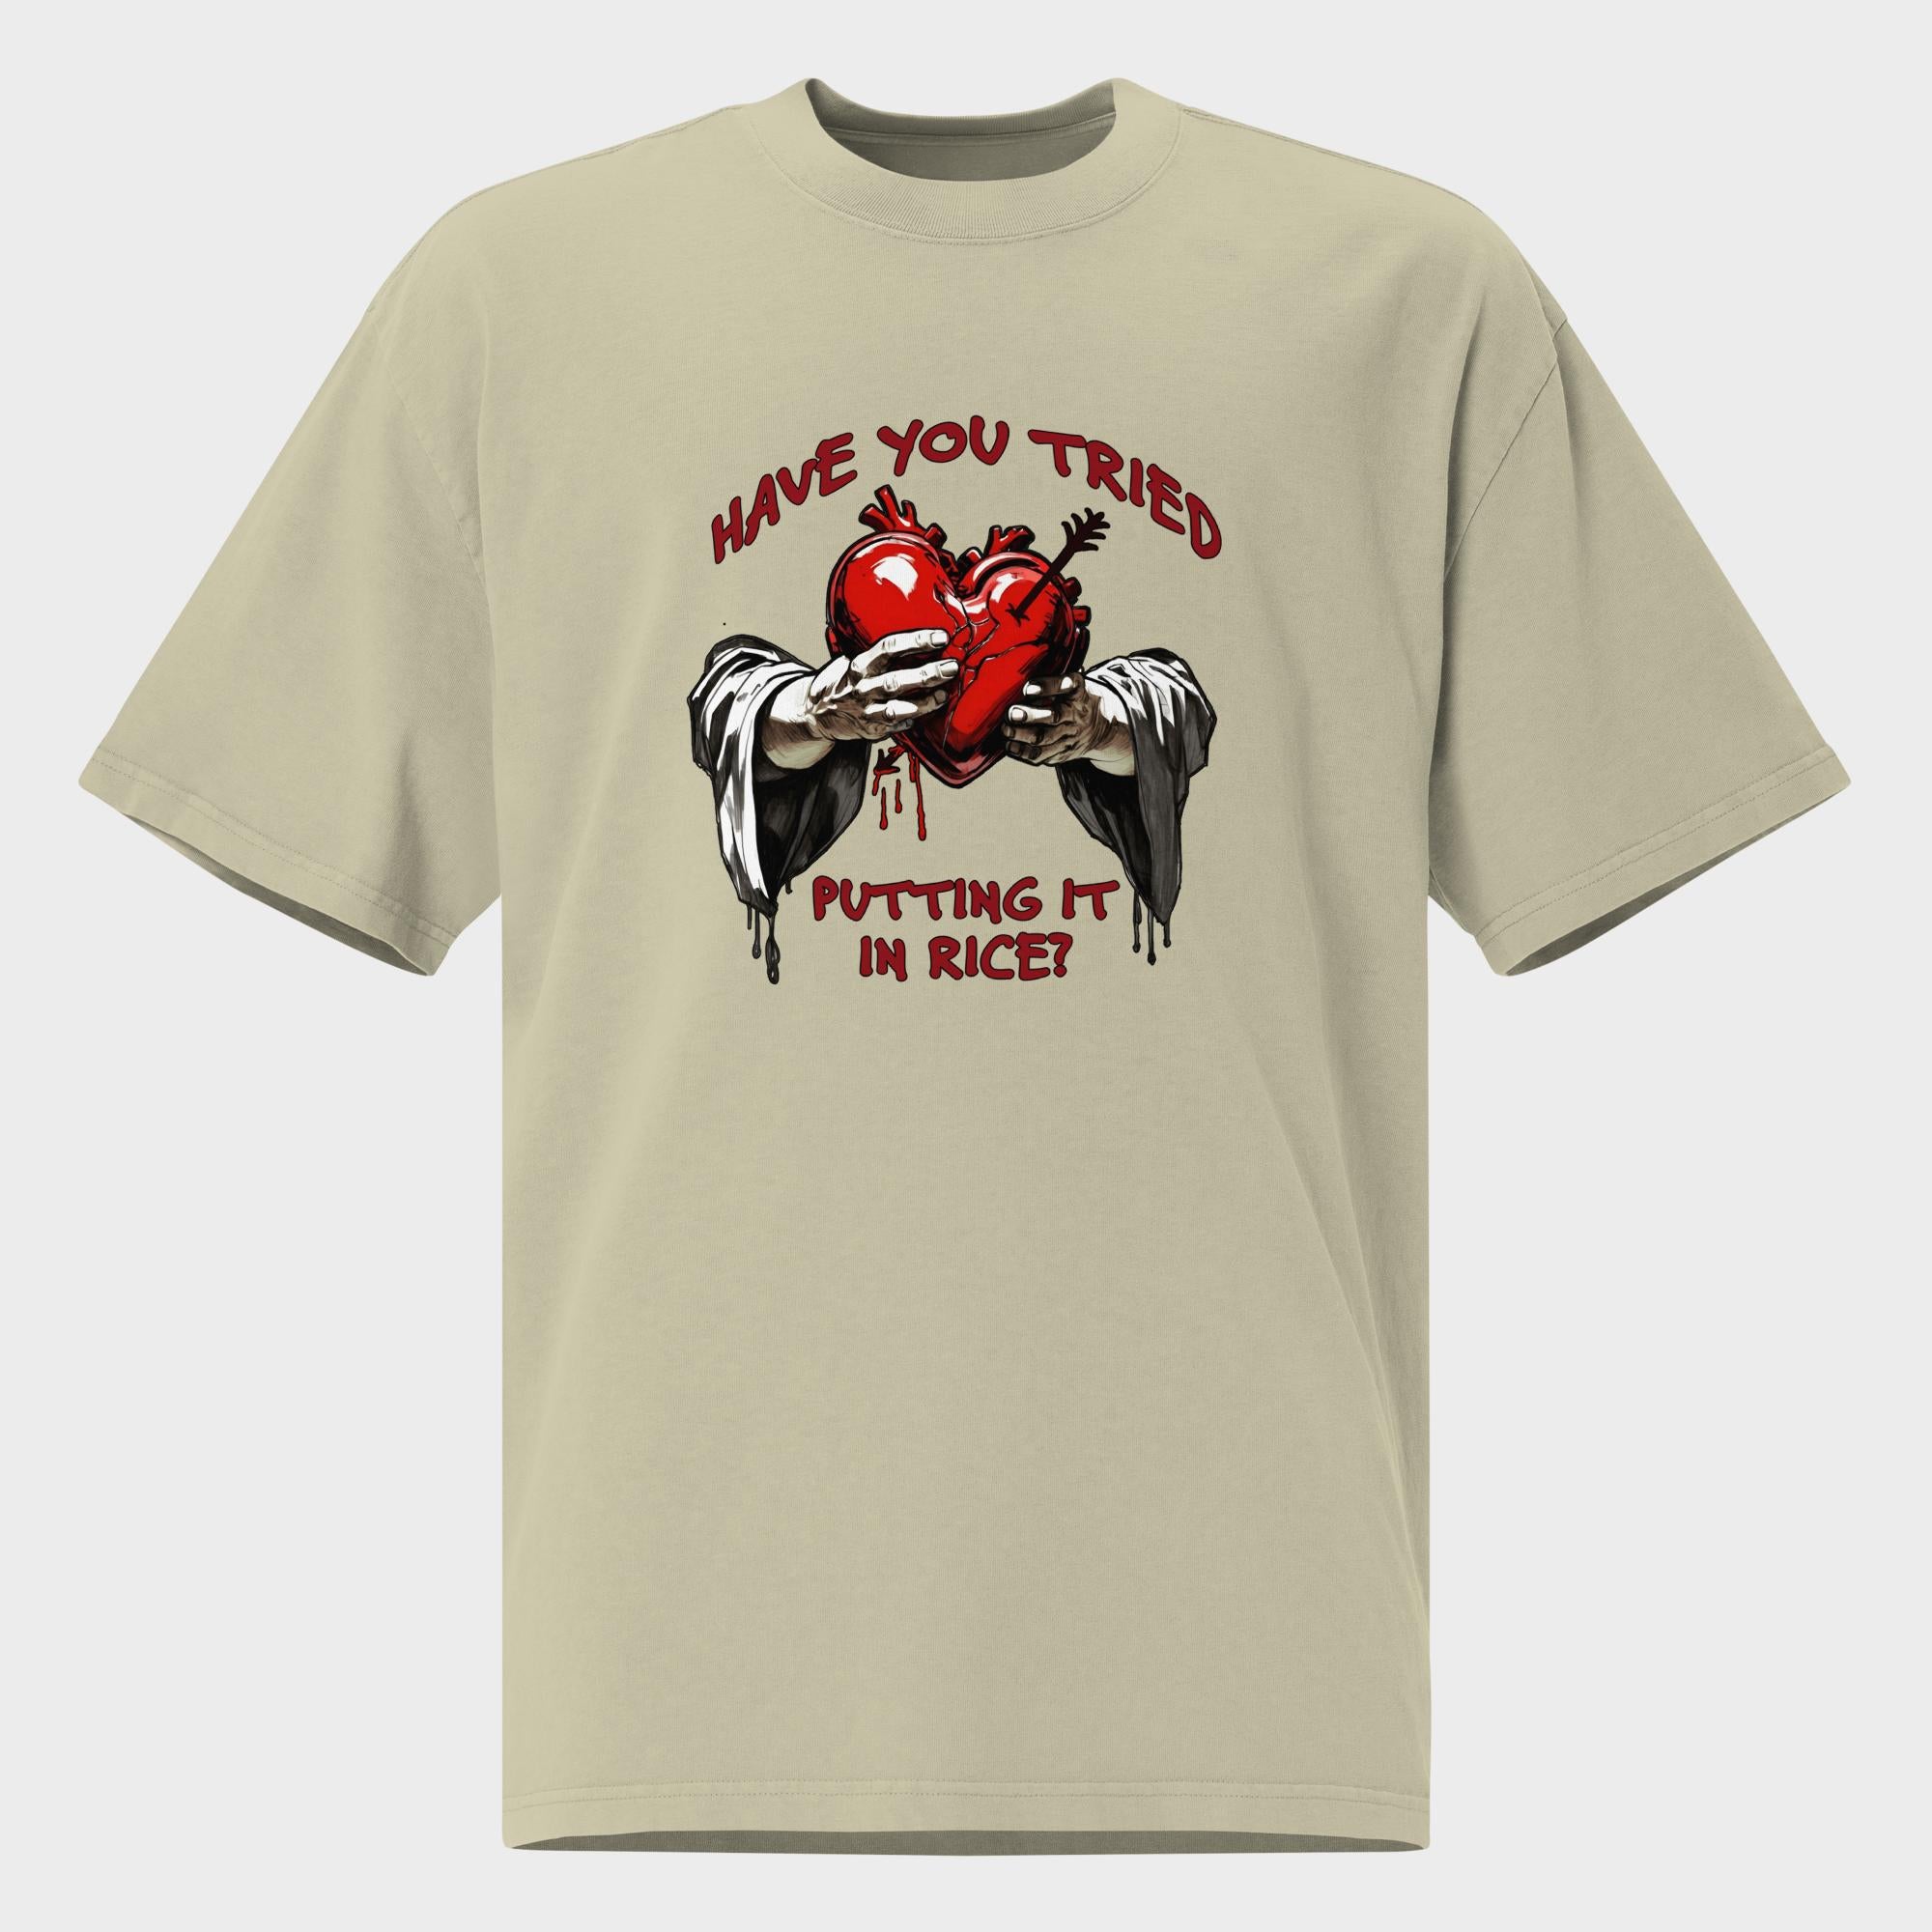 Have You Tried Putting It In Rice? - Oversized T-Shirt